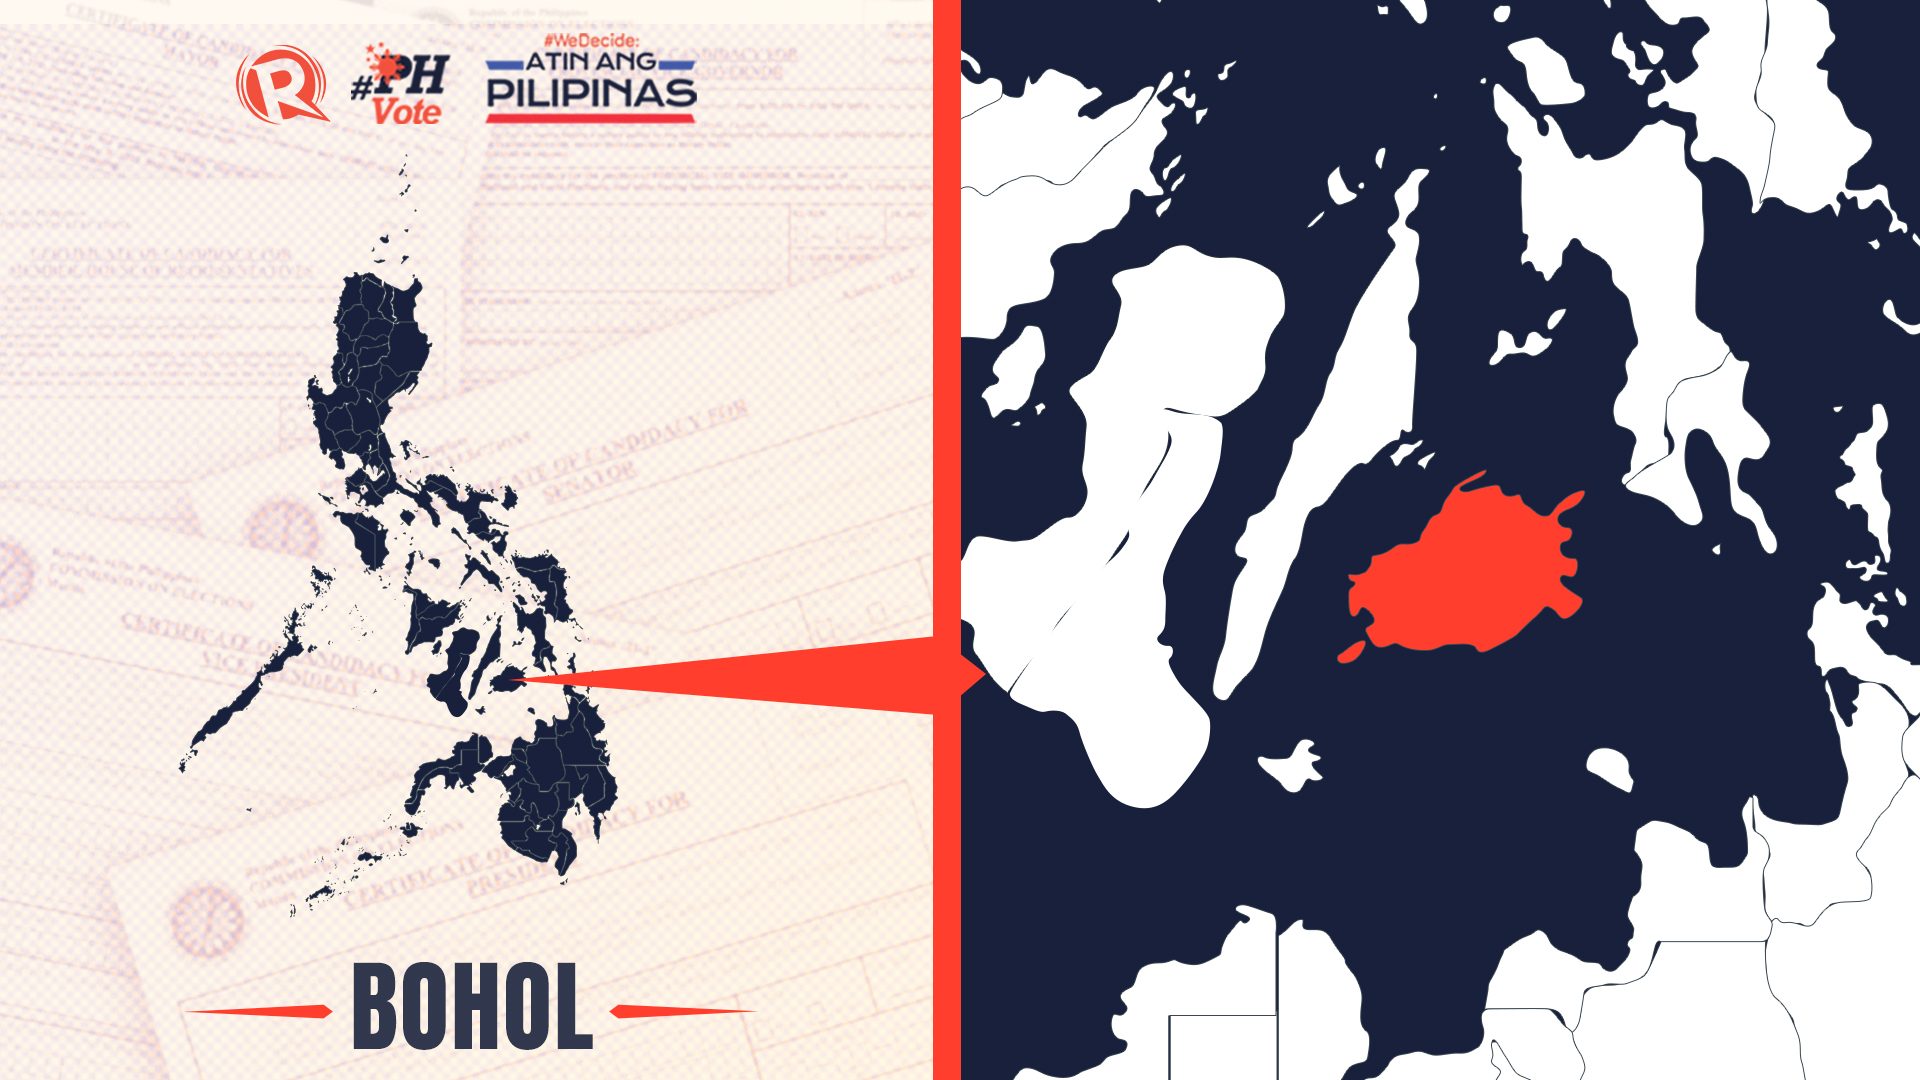 LIST: Who is running in Bohol in the 2022 Philippine elections?